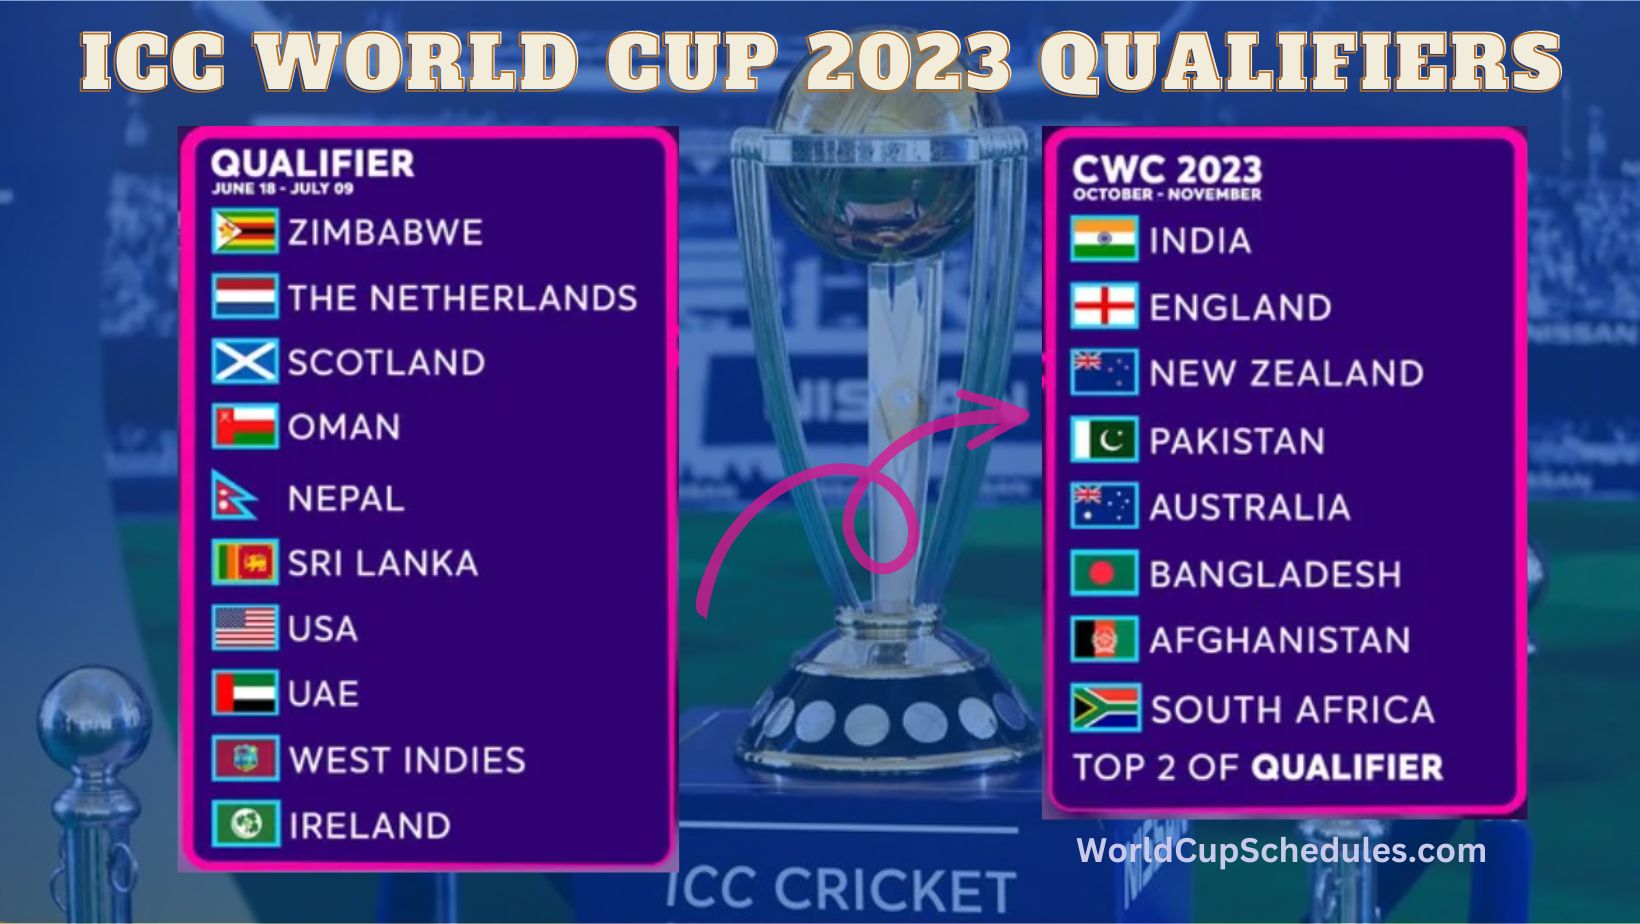 ICC World Cup 2023 Qualifier squads